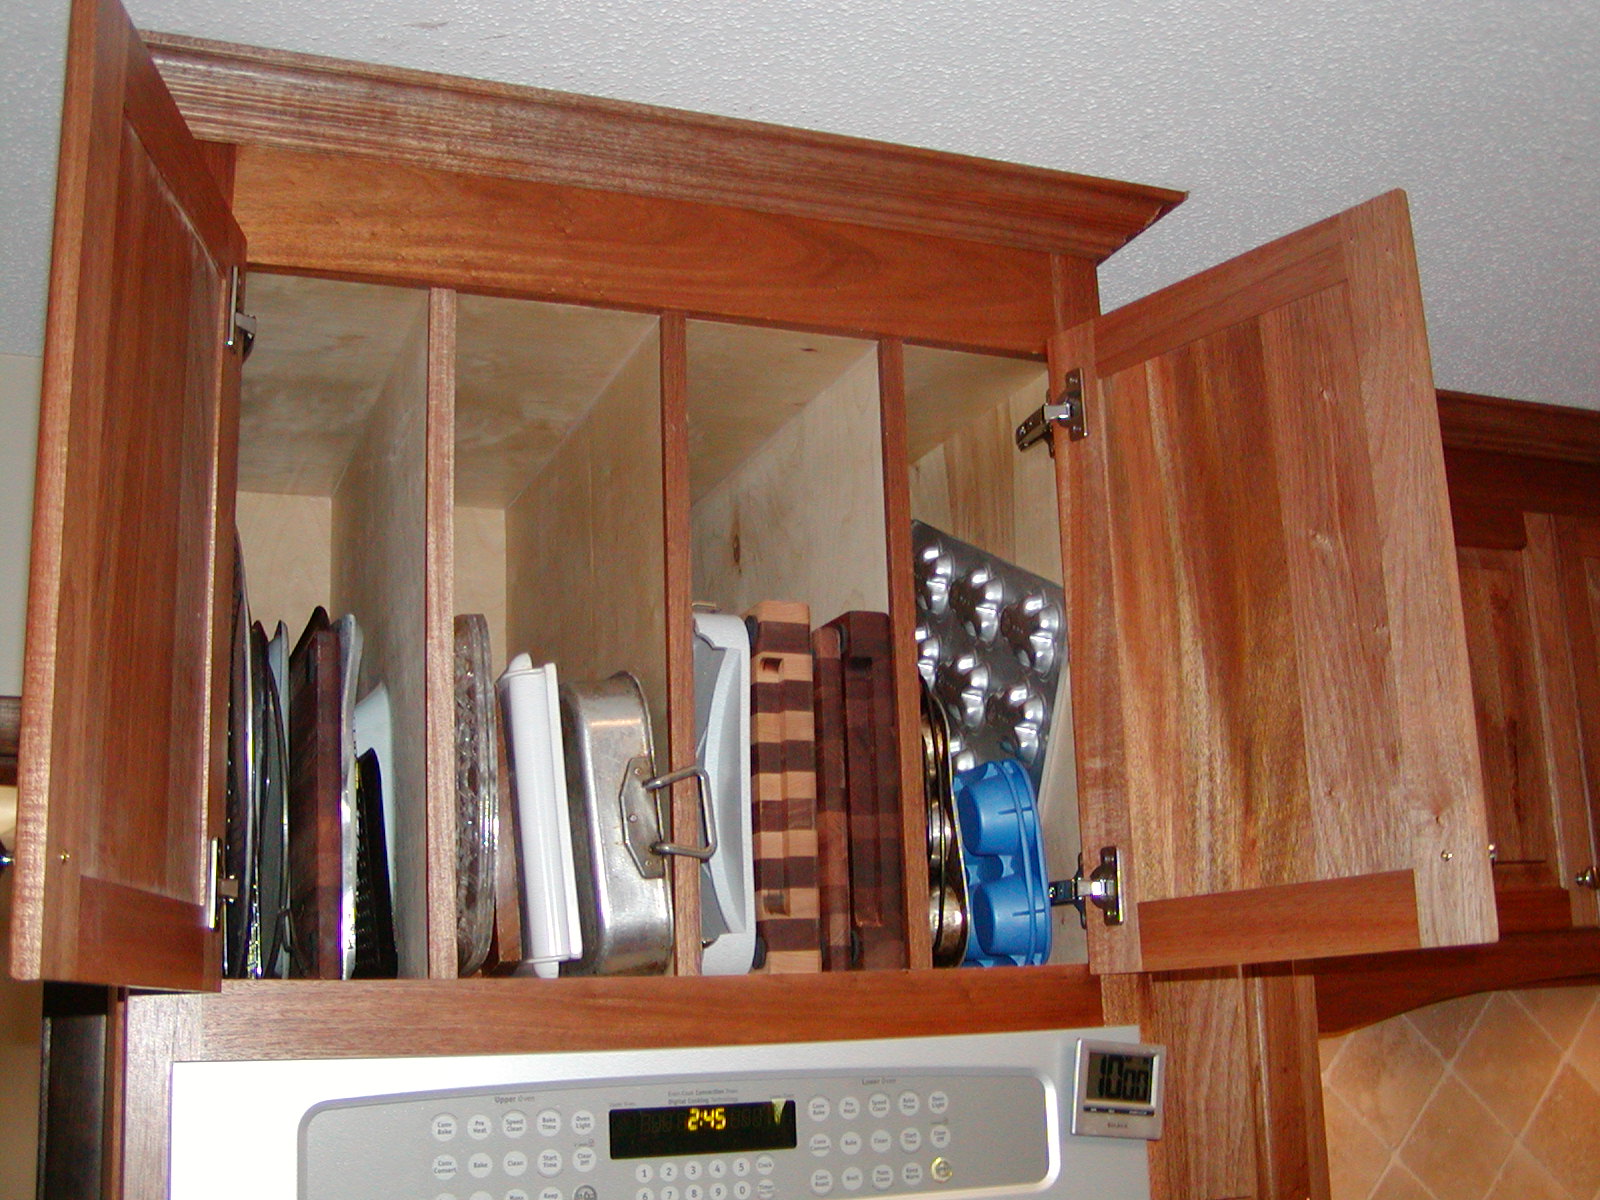 http://www.jandscabinetry.com/wp-content/uploads/2010/02/MAHOGANY-Cabinets-001-41.JPG